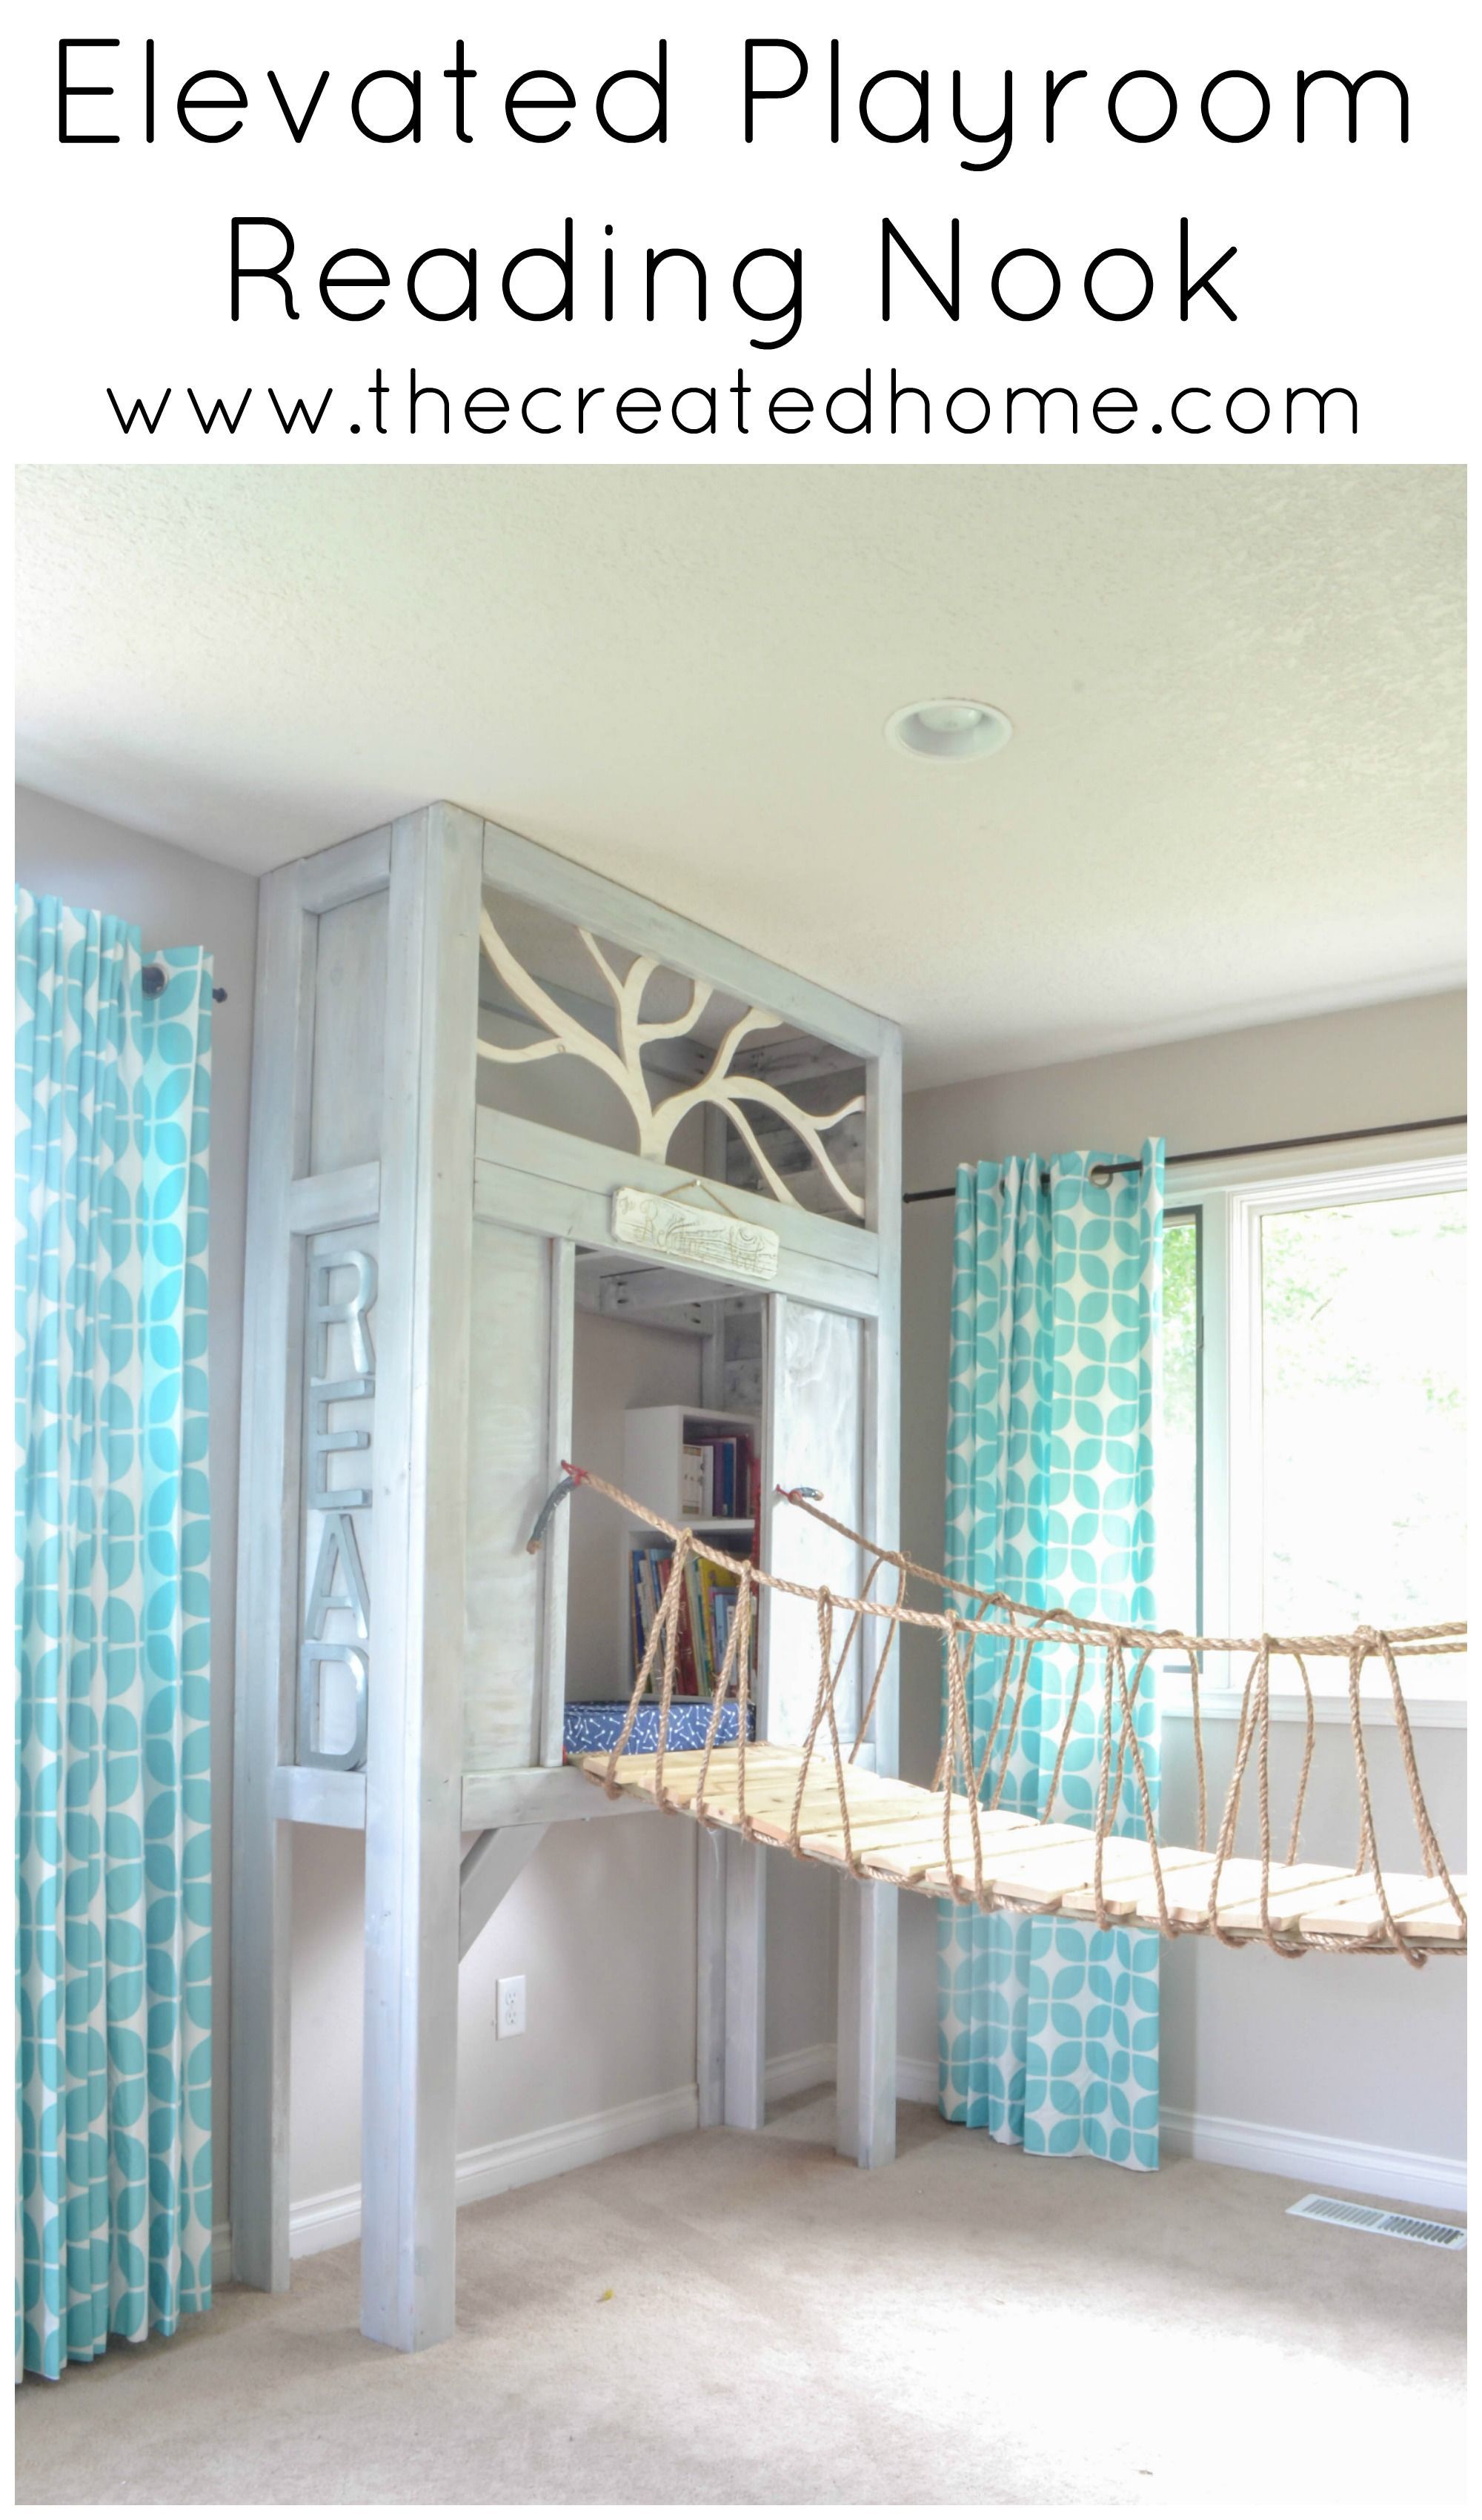 Elevated Playroom Reading Nook - The Created Home -   16 room decor Kids awesome ideas